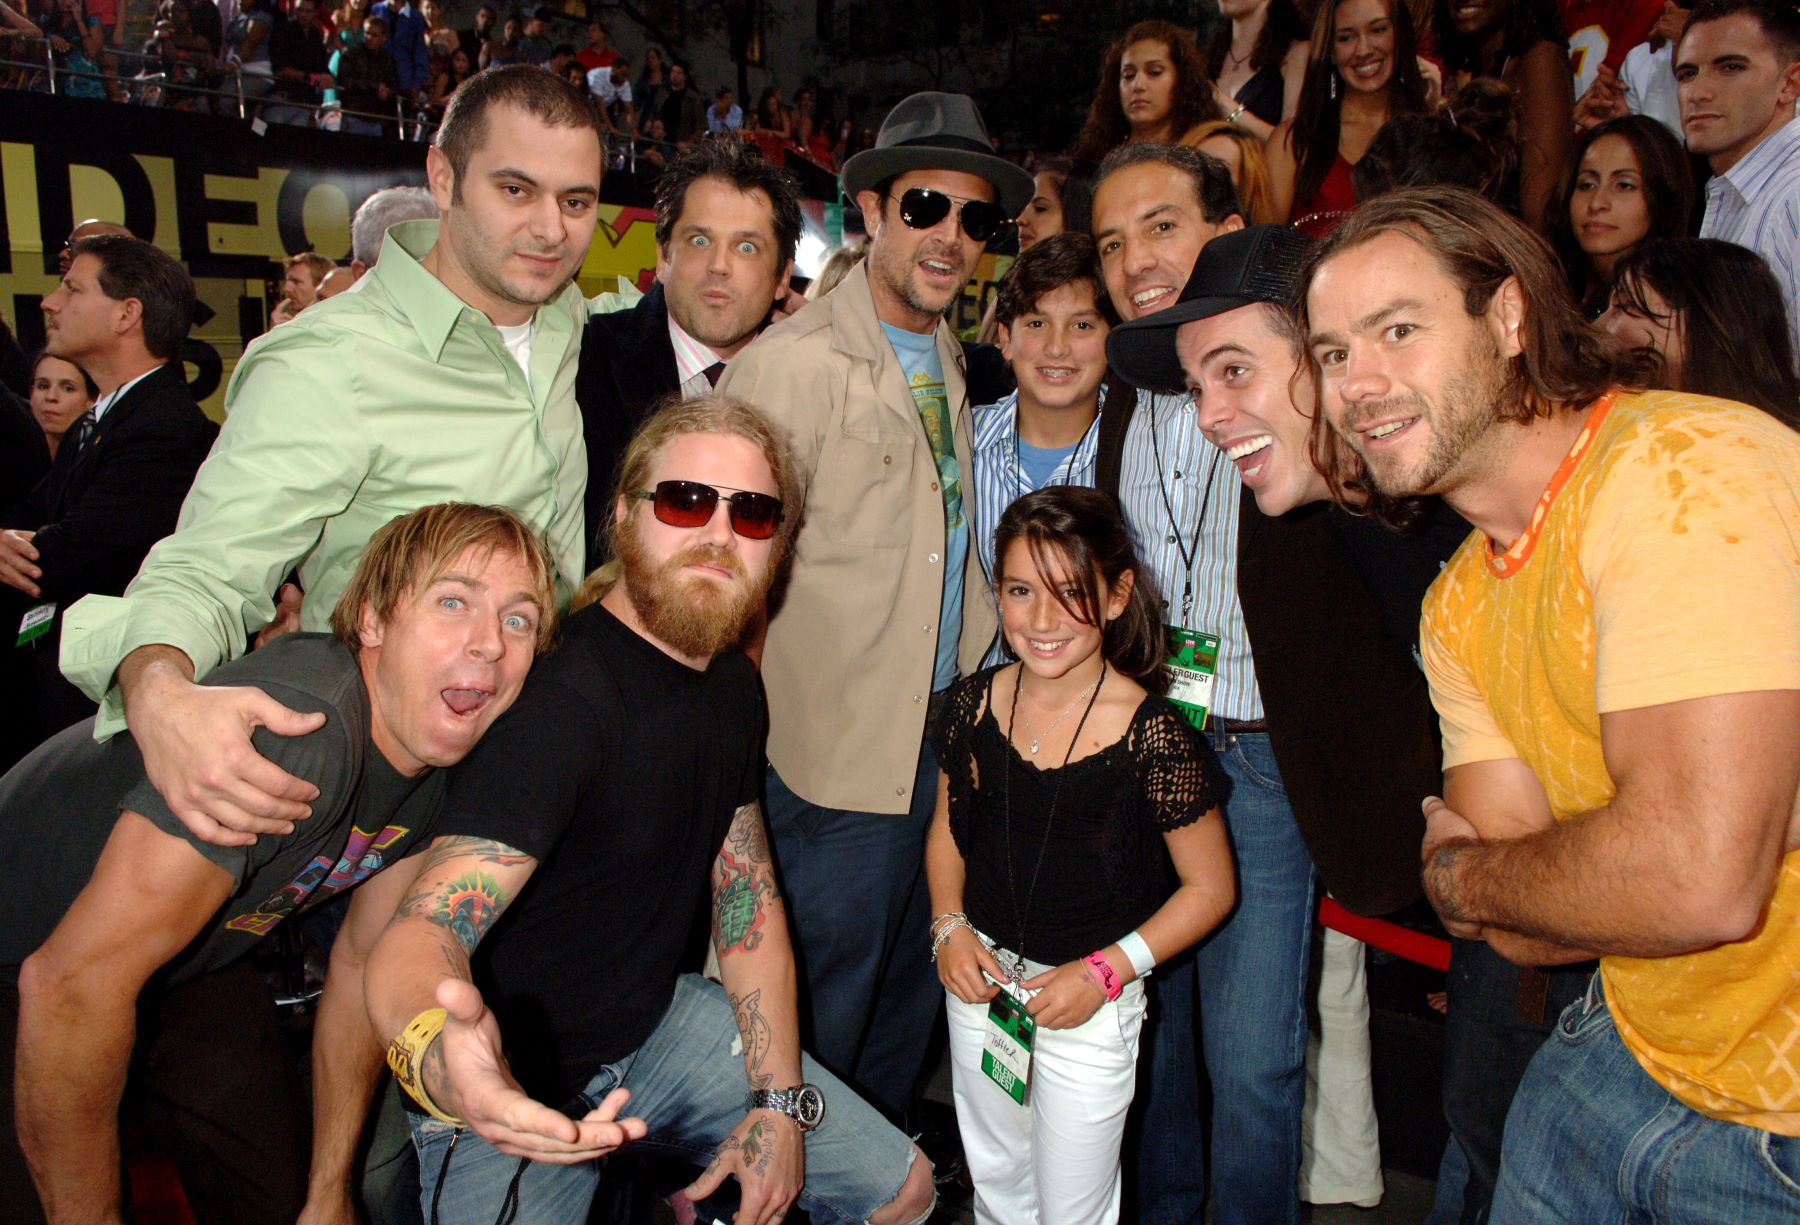 The cast of 'Jackass' at the 2006 MTV Video Music Awards